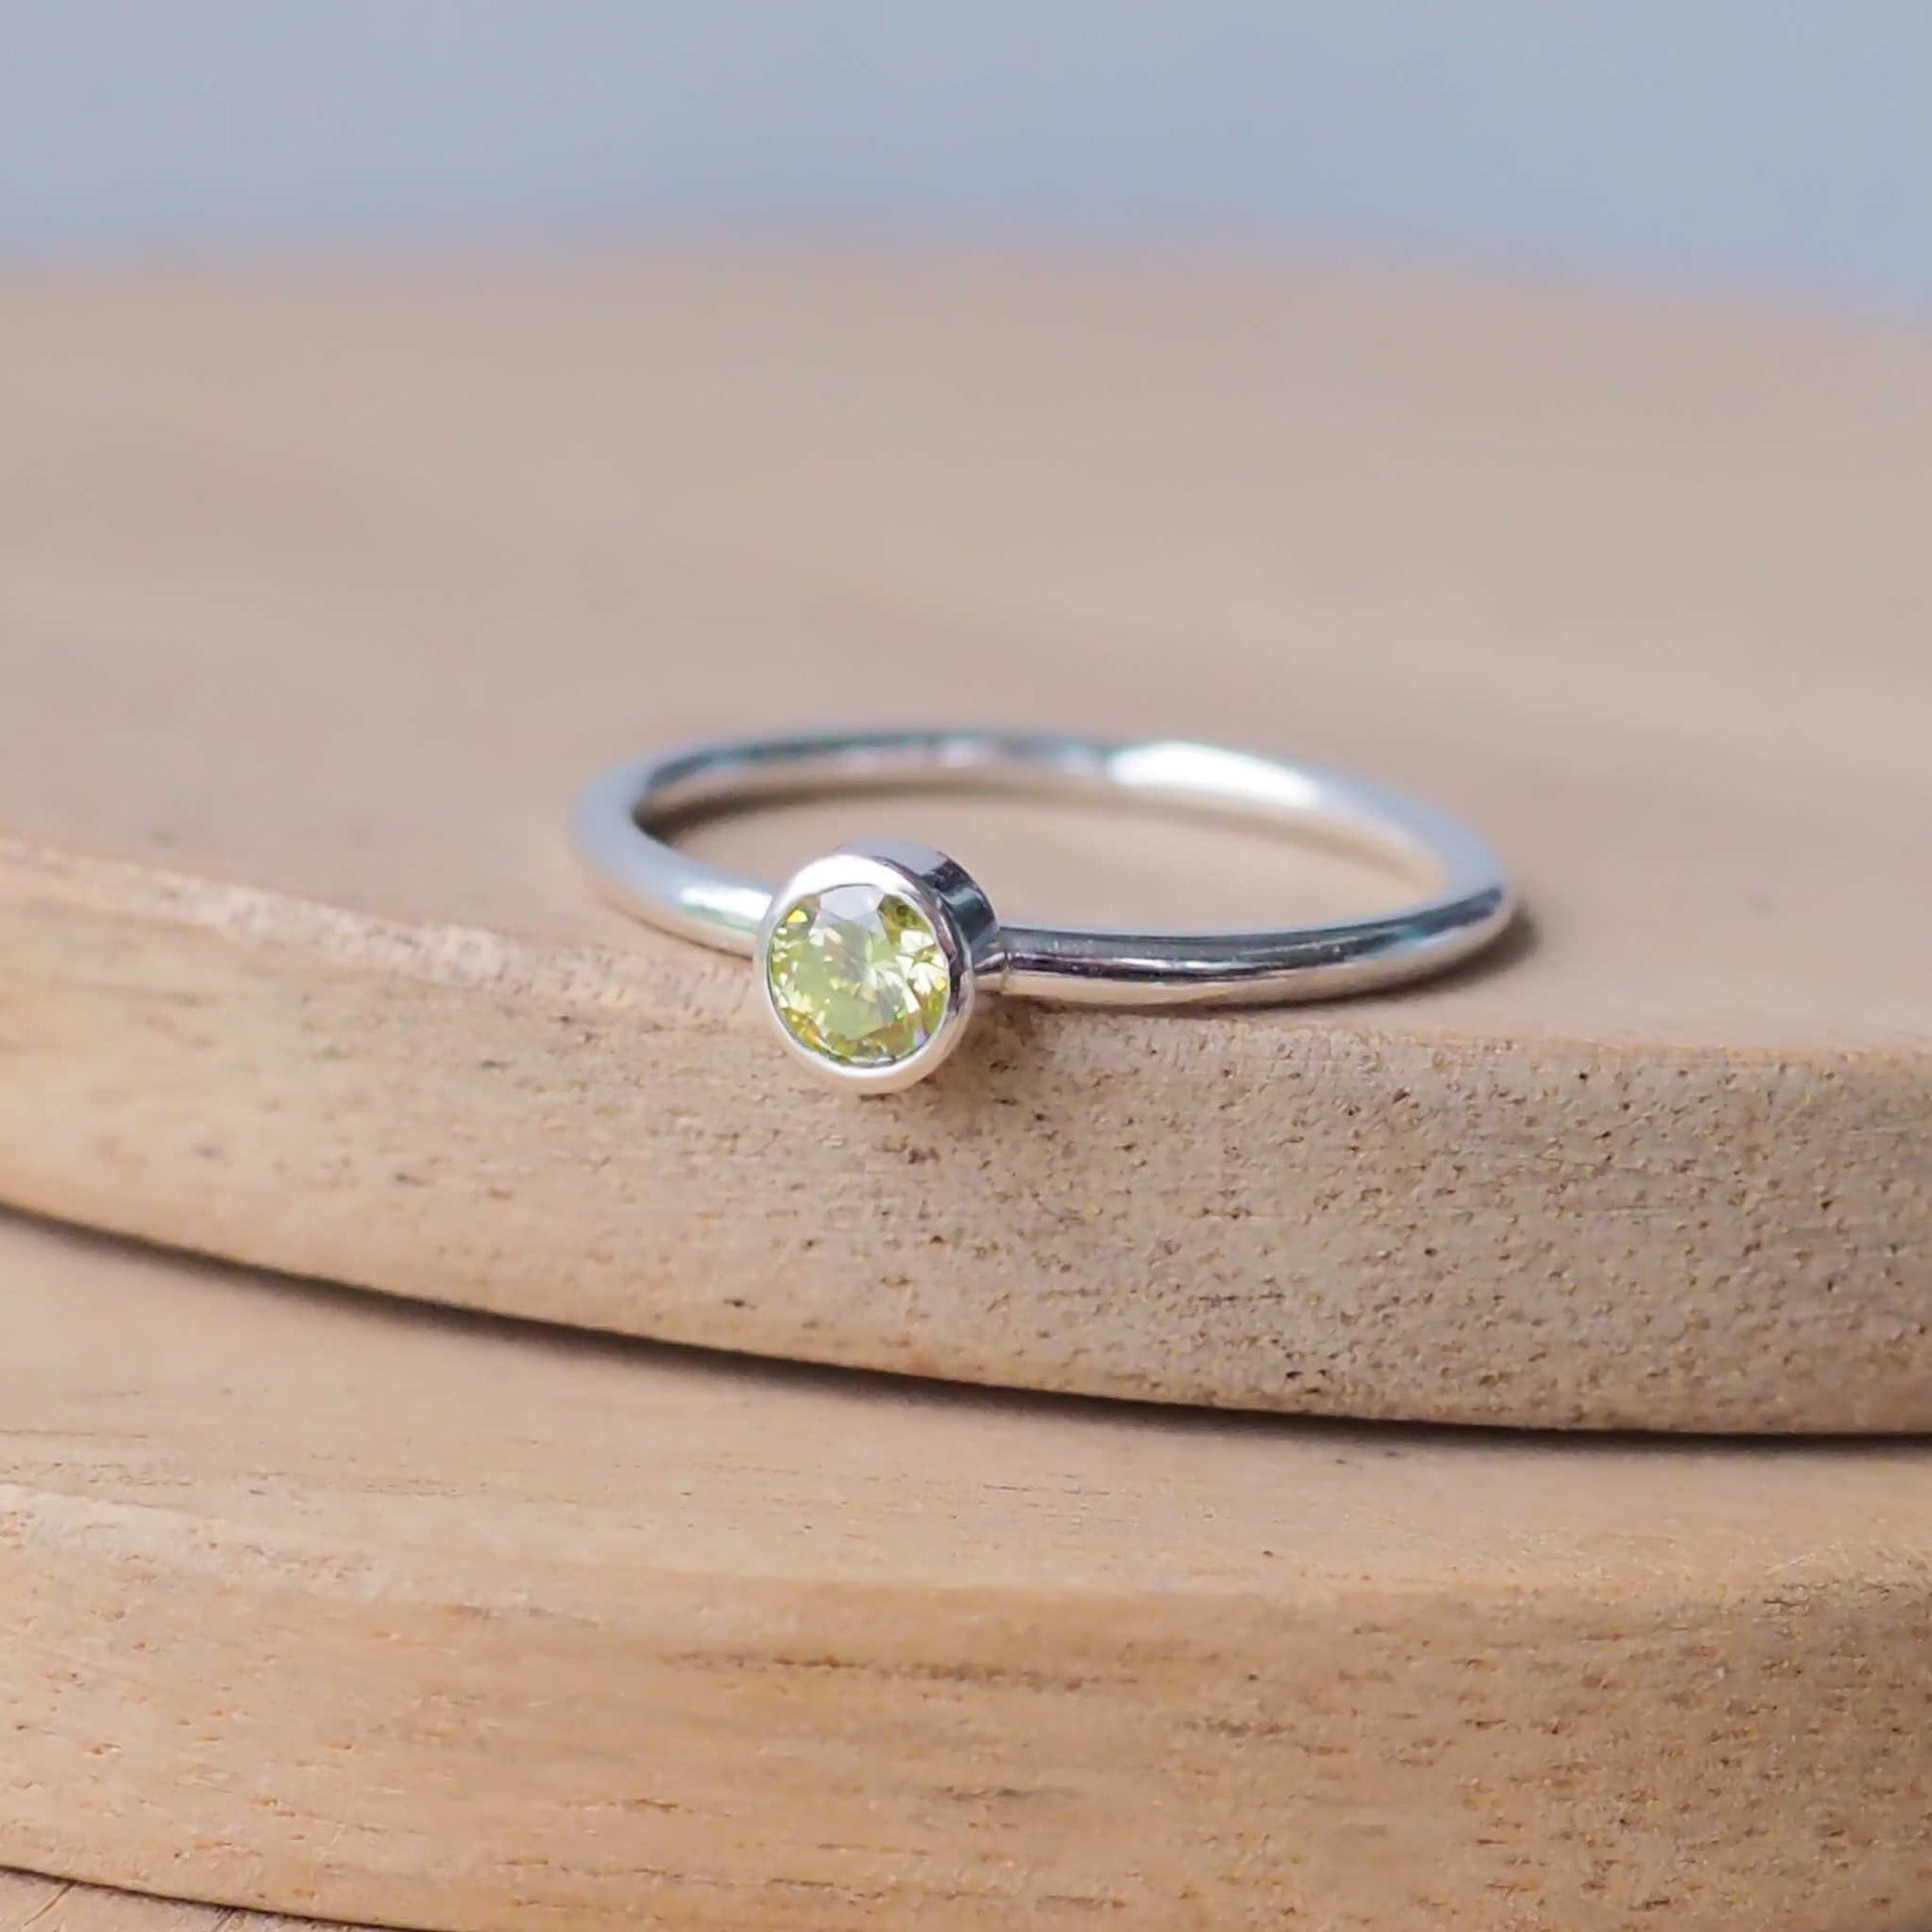 Silver ring with a Mossy light Green Peridot gemstone. The ring is simple in style with no embellishment , with a round wire band 1.5mm thick with a simple Peridot 4mm round cubic zirconia stone set in an enclosed silver setting. Peridot is birthstone for August. The ring is Sterling Silver and made to your ring size. Handmade in Scotland by Maram Jewellery